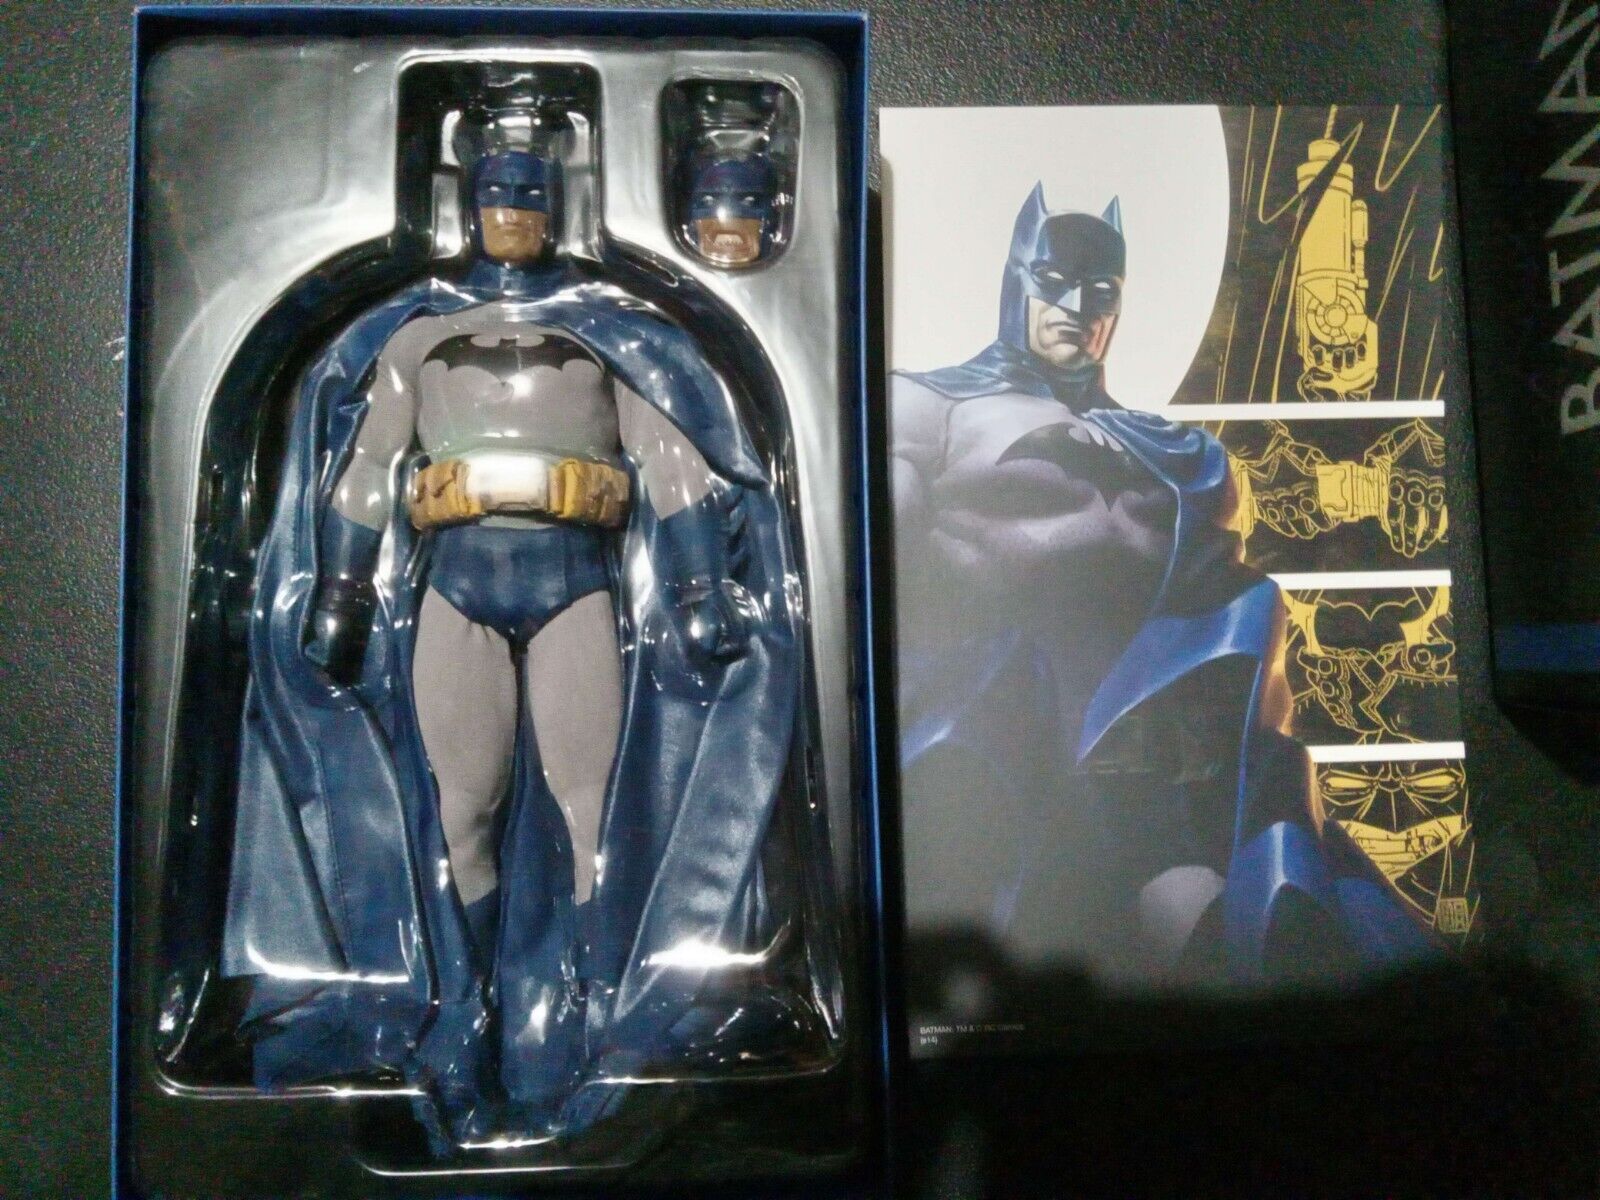 1/6 Sideshow Batman exclusive box has wear, Figure Stained suit see pictures